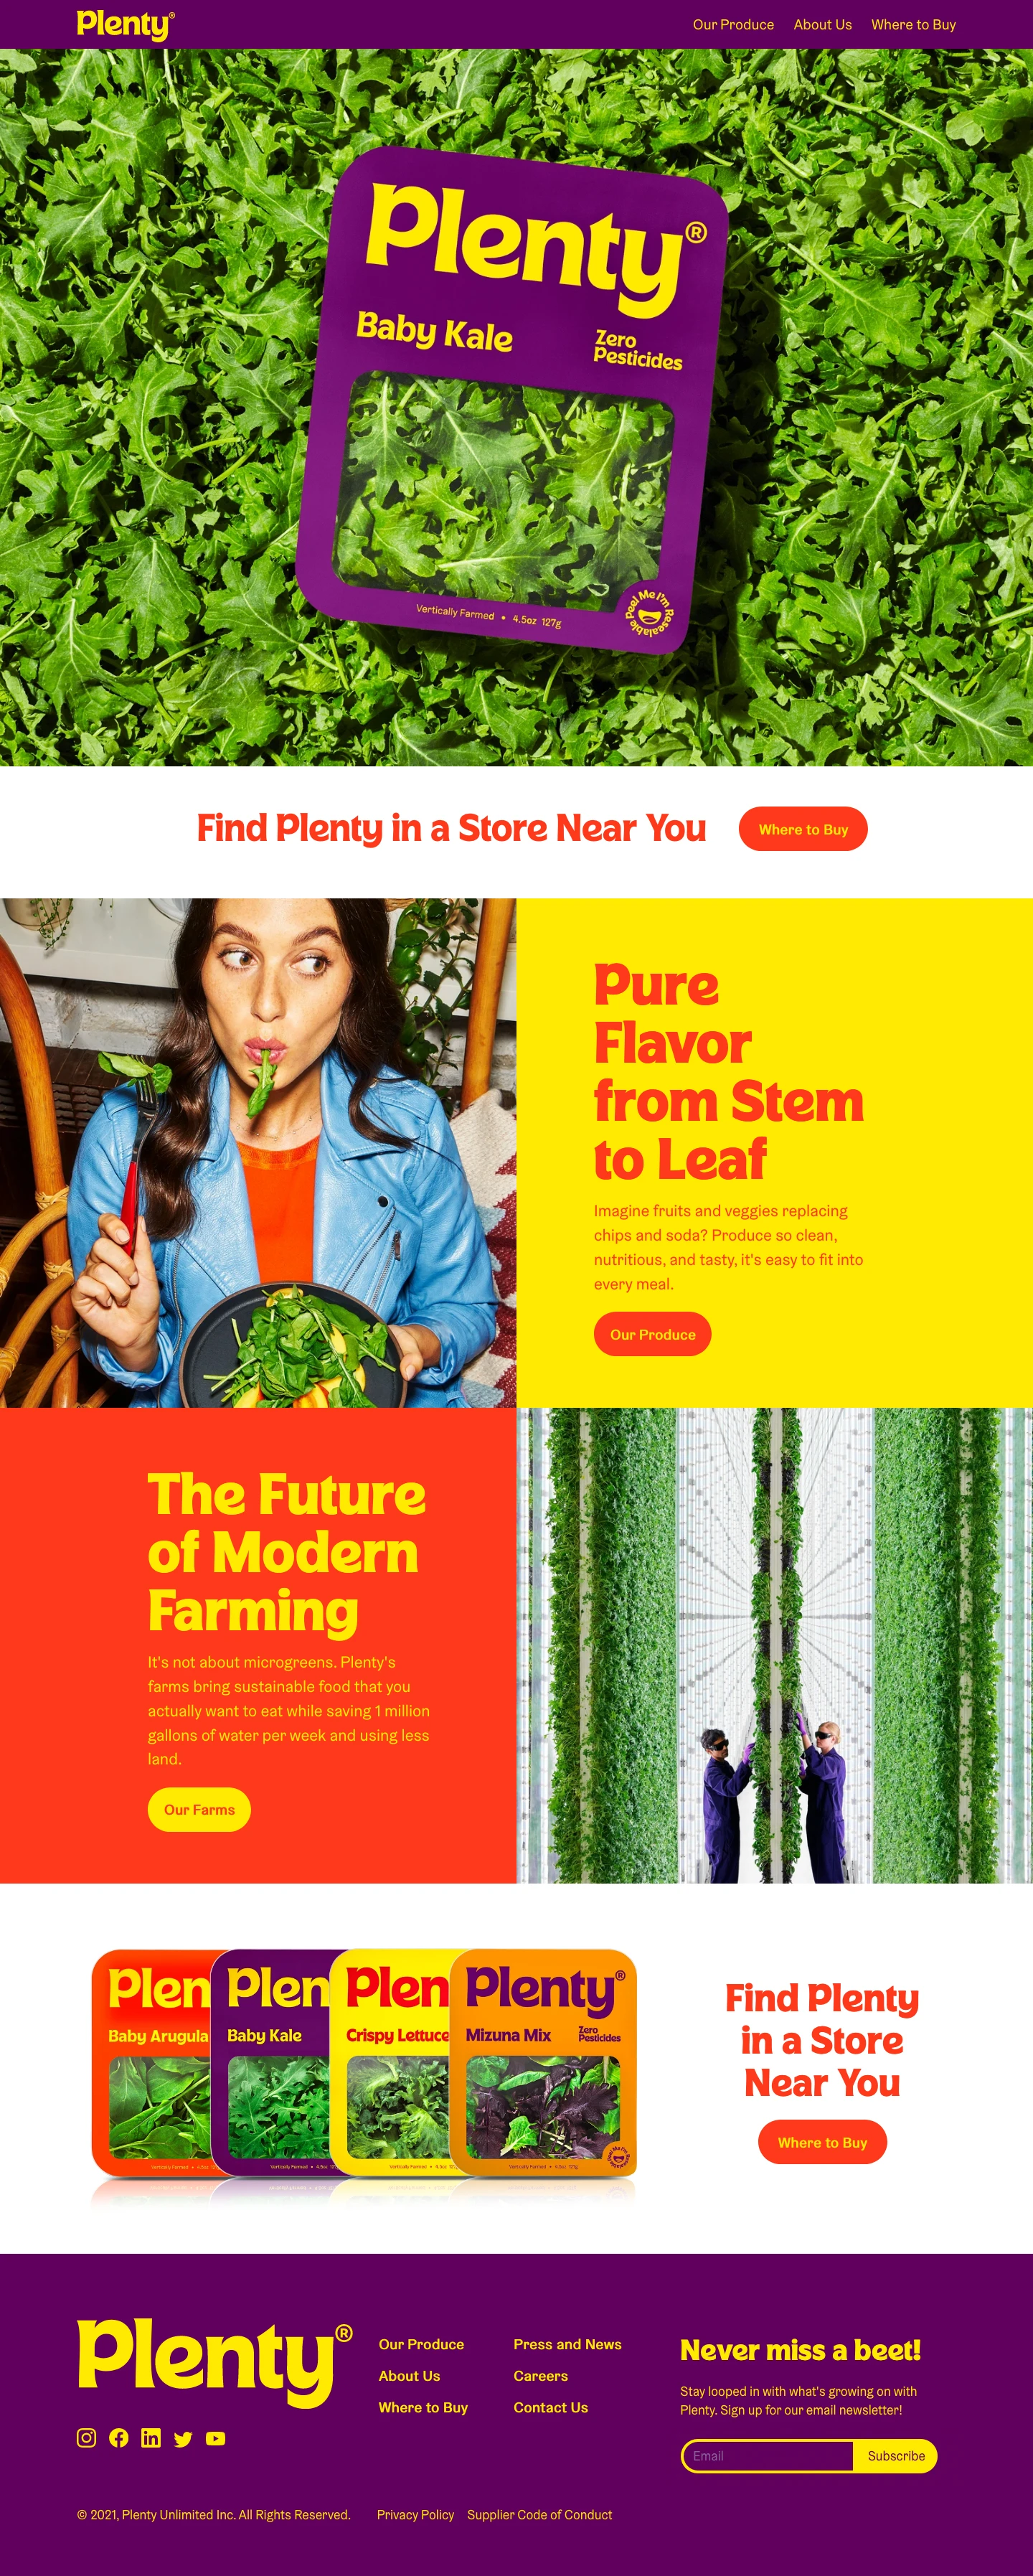 Plenty Landing Page Example: Plenty is an indoor vertical farming company that uses less space and fewer resources to grow flavorful, healthy, fresh, and clean produce year-round.